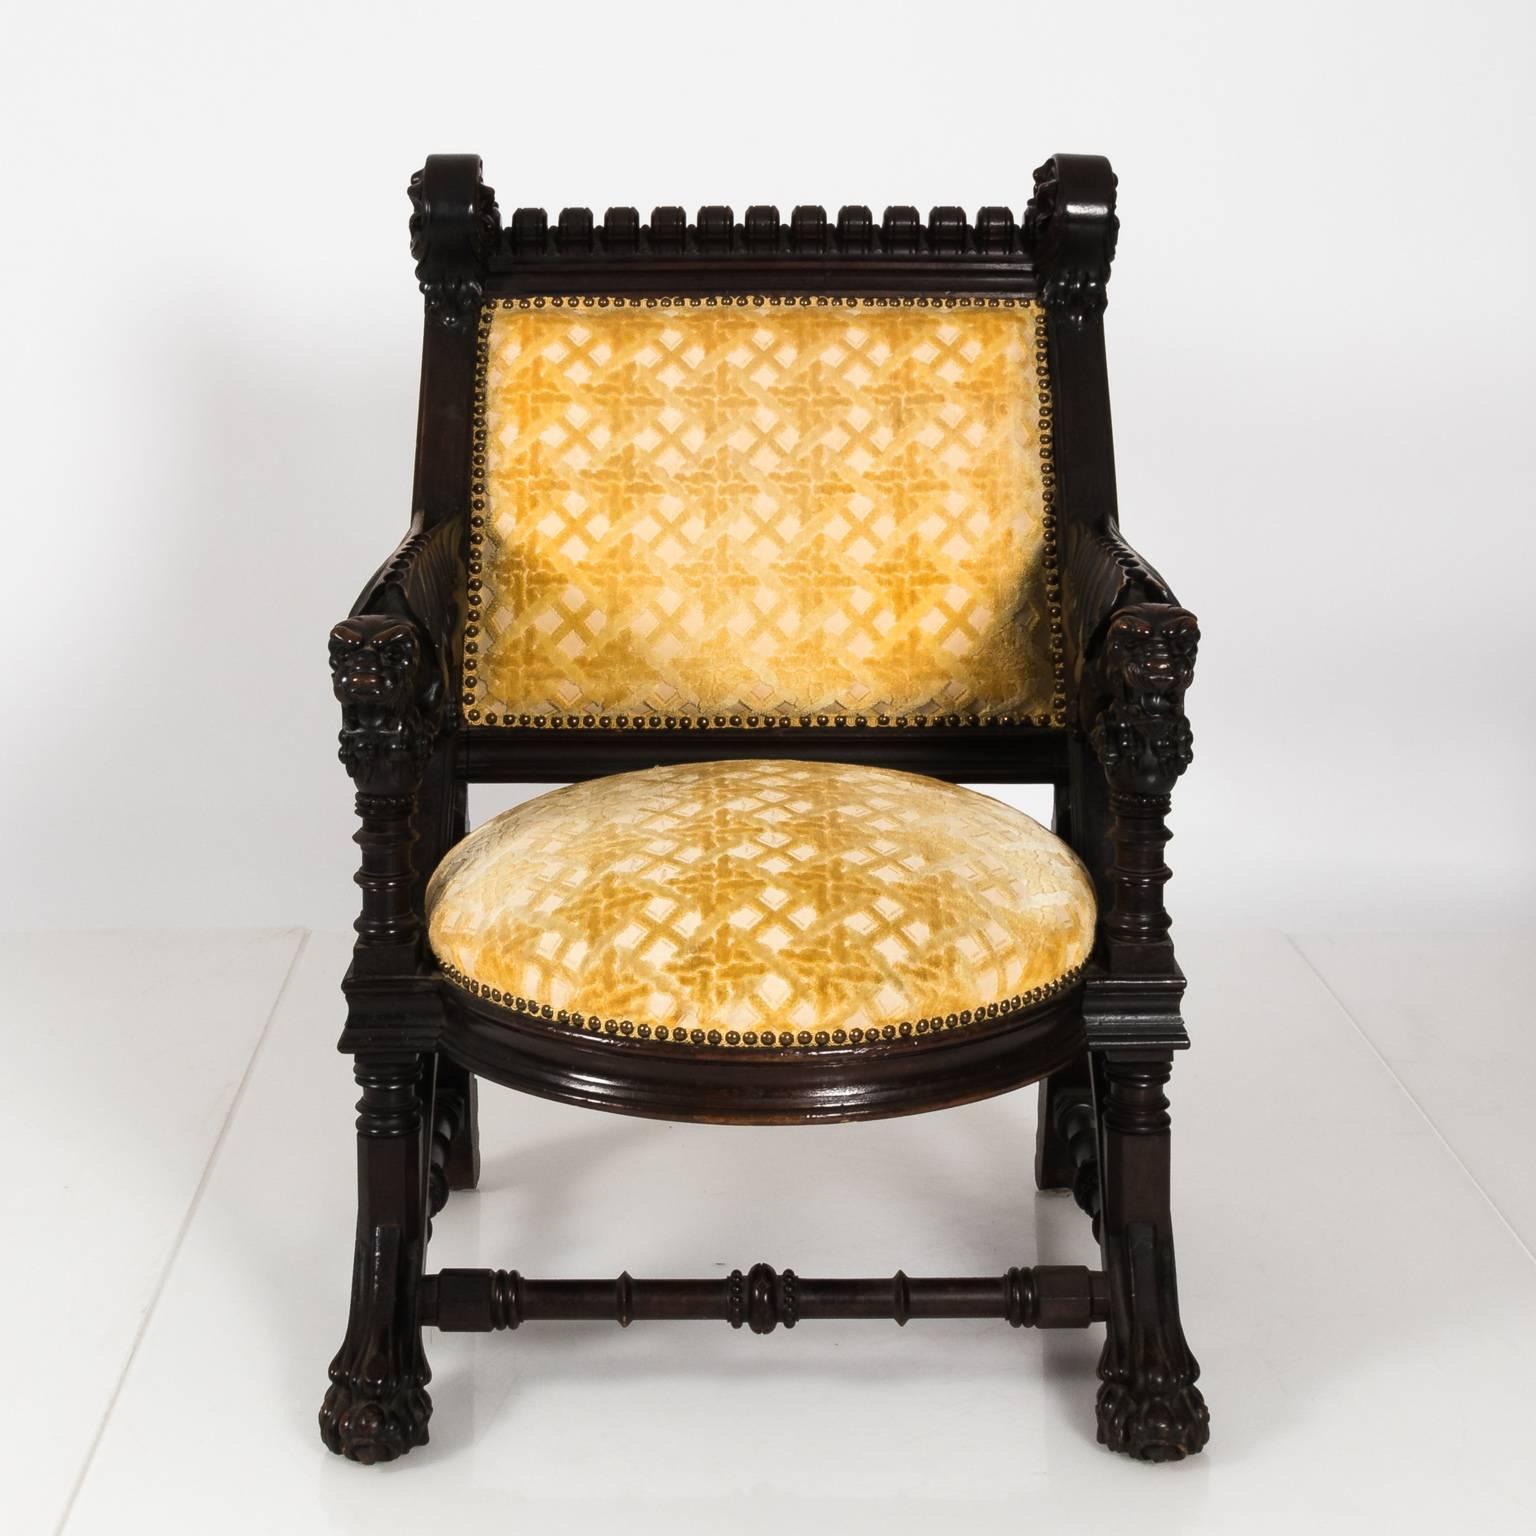 Pair of American Gothic Revival Armchairs by Daniel Pabst, circa 1878 For Sale 6